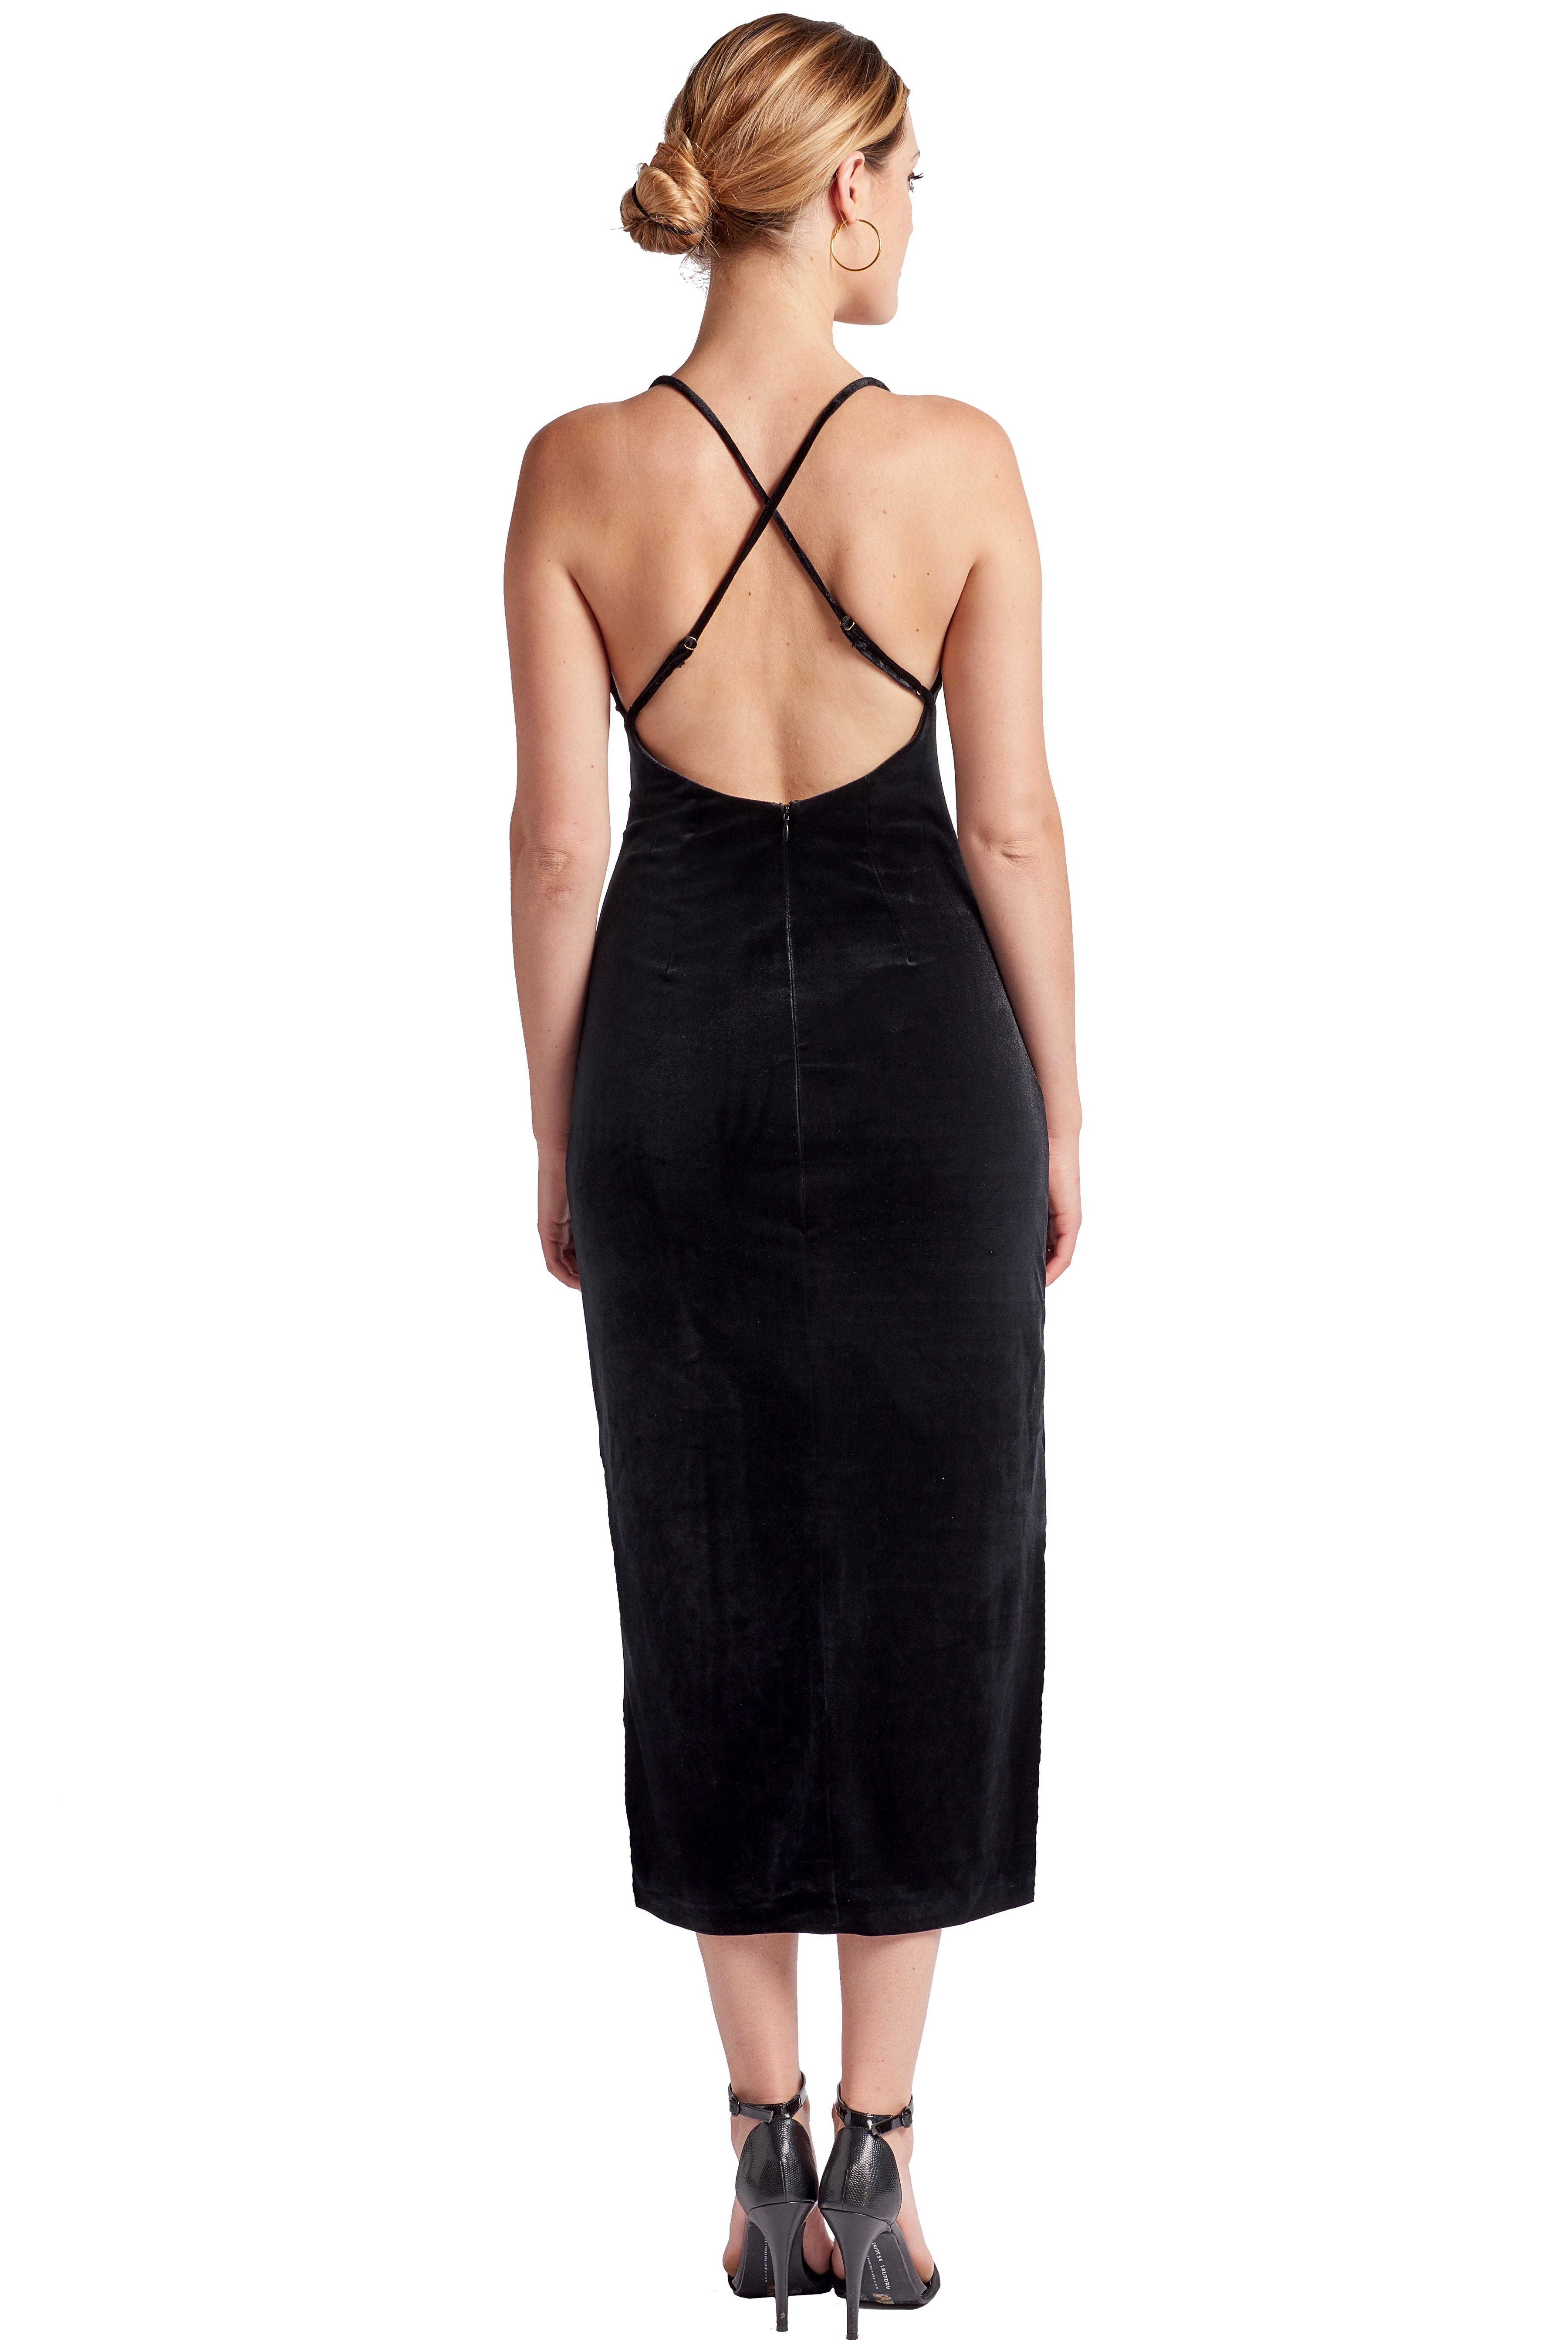 Back view of model wearing black stretch velvet midi dress with low back and criss cross spaghetti straps.